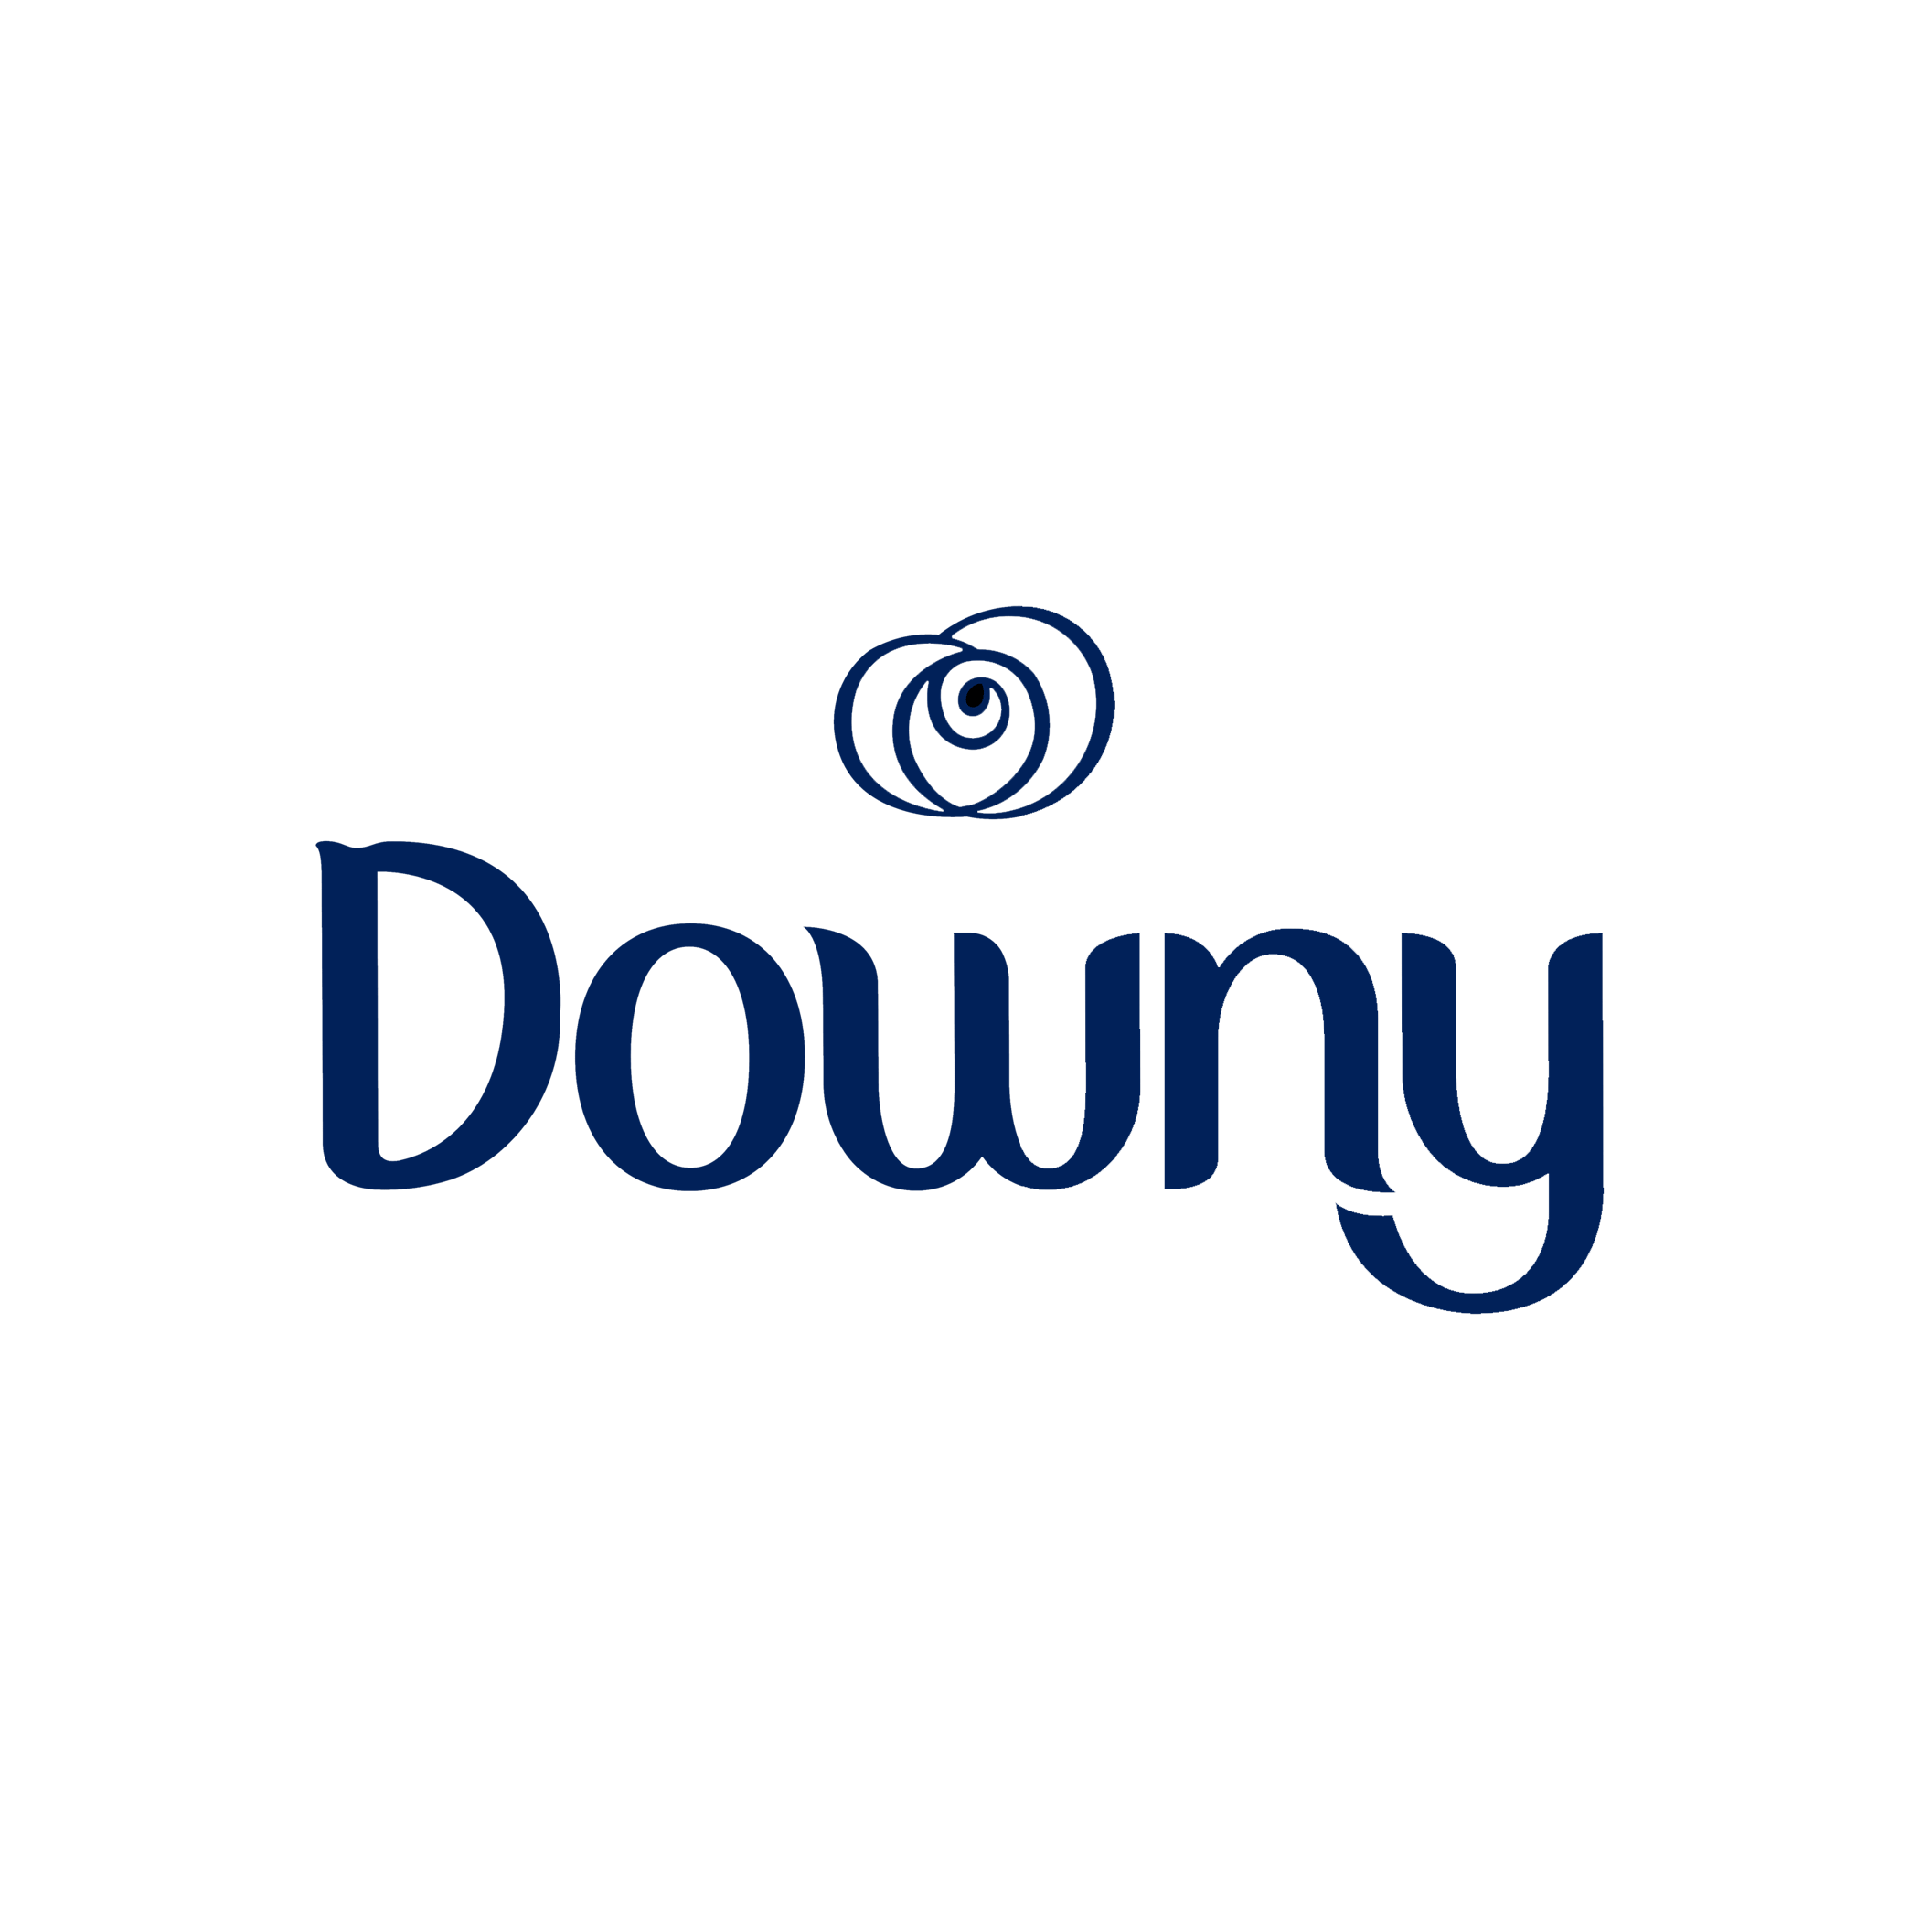 Product Brand: Downy